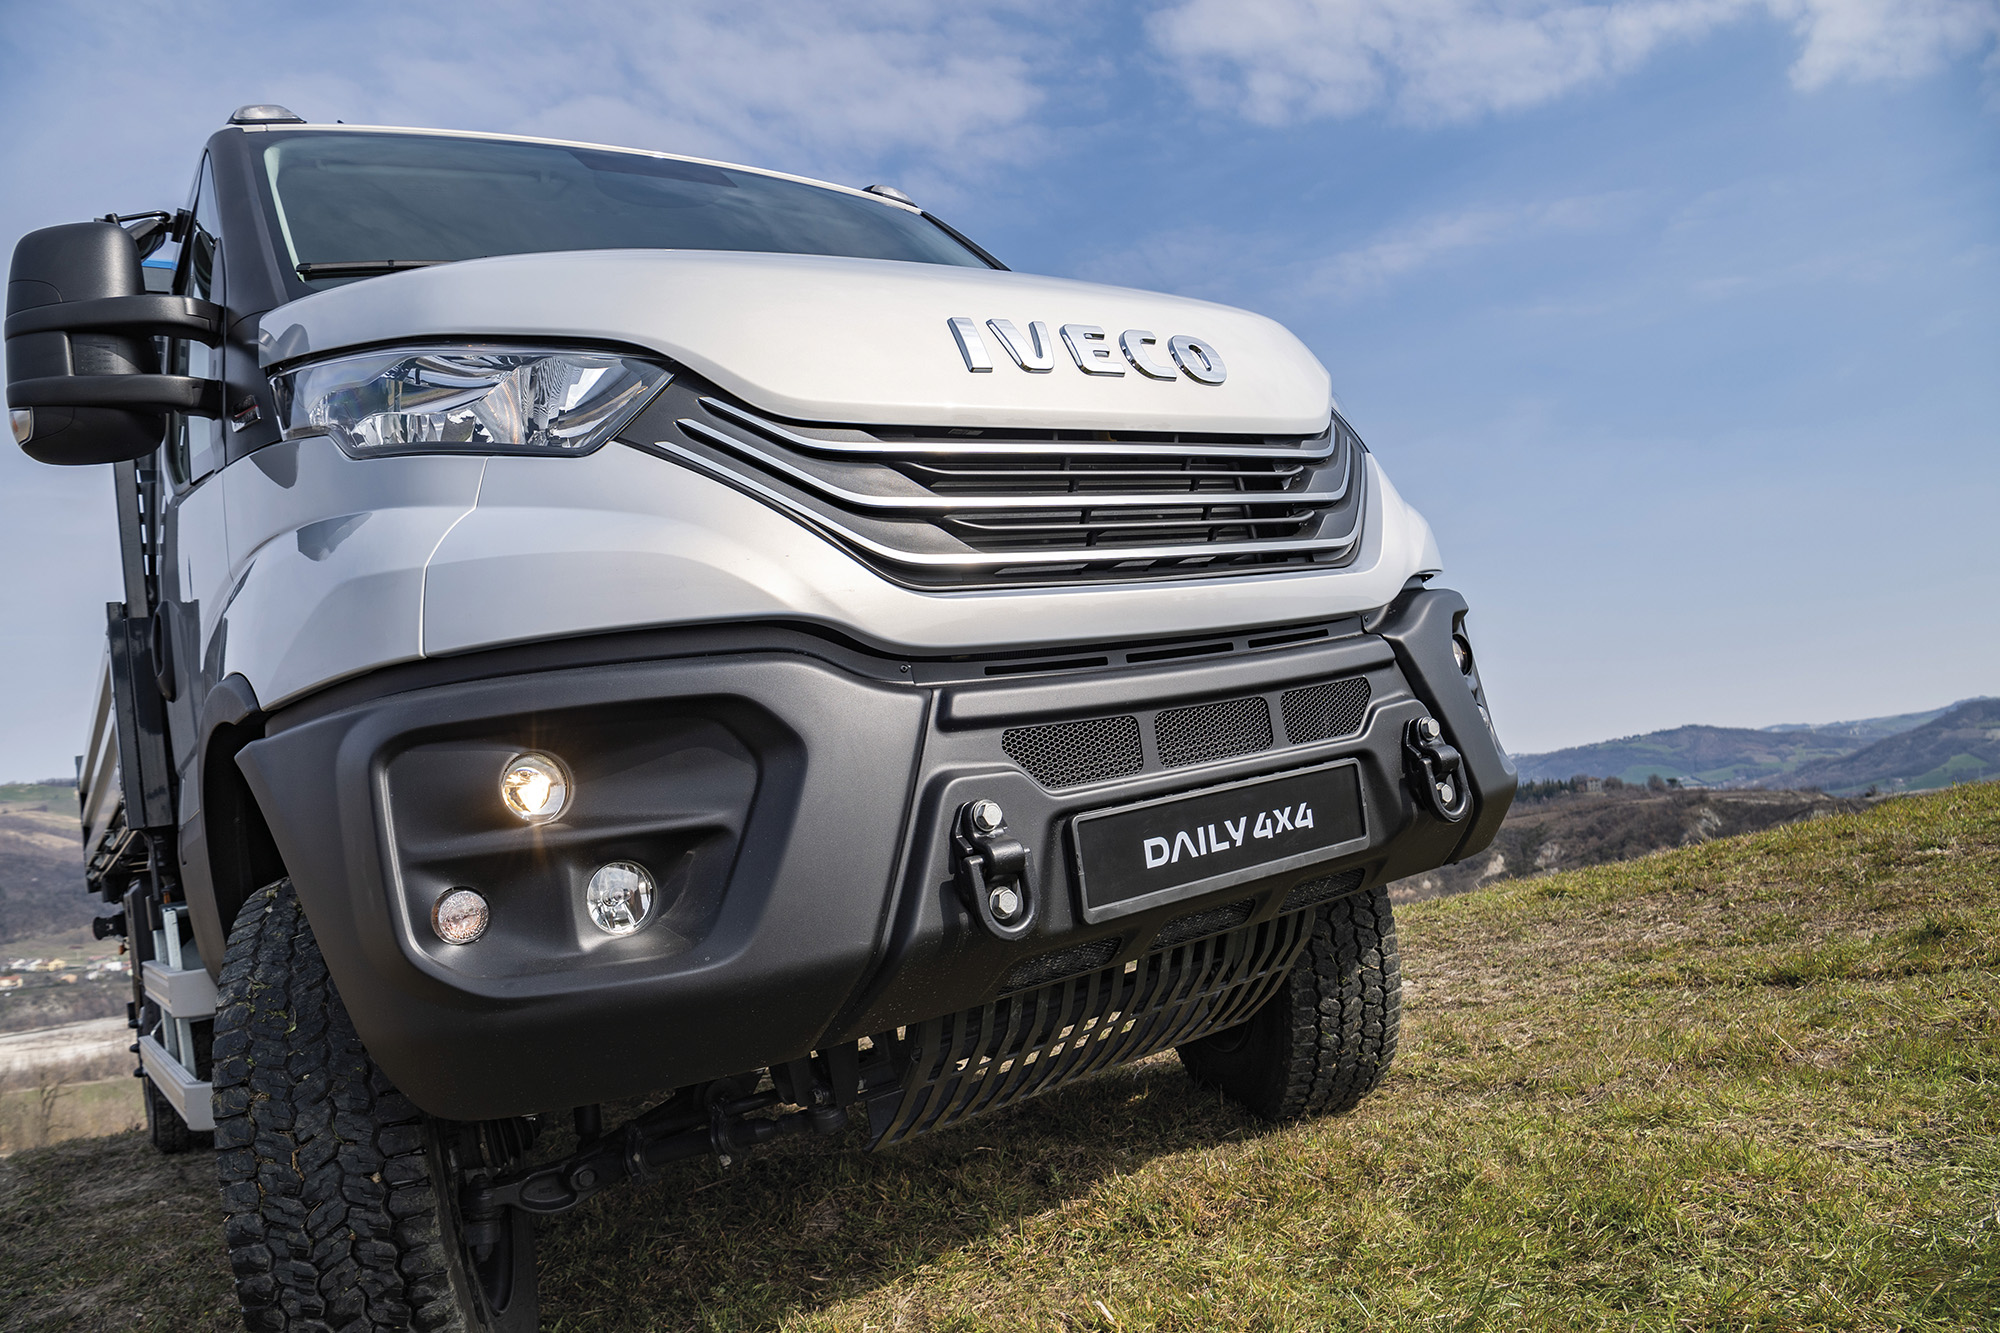 NEW DAILY - IVECO REVEALS DETAILS OF UPDATED 4x4 MODEL DUE HERE NEXT YEAR